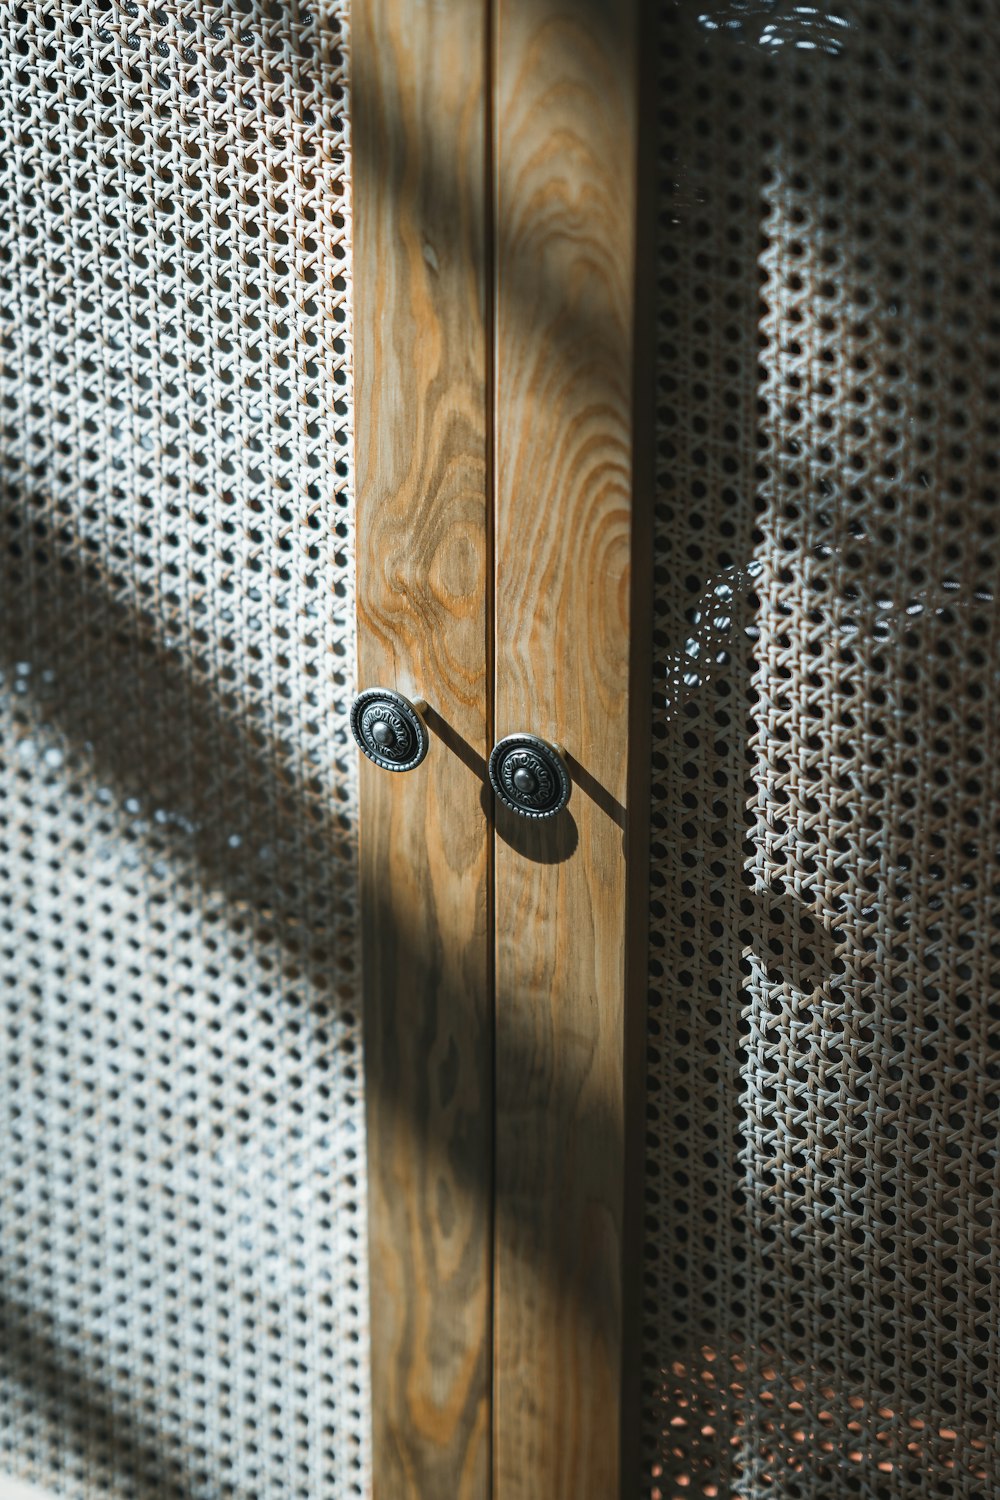 a close up of a wooden door with metal handles